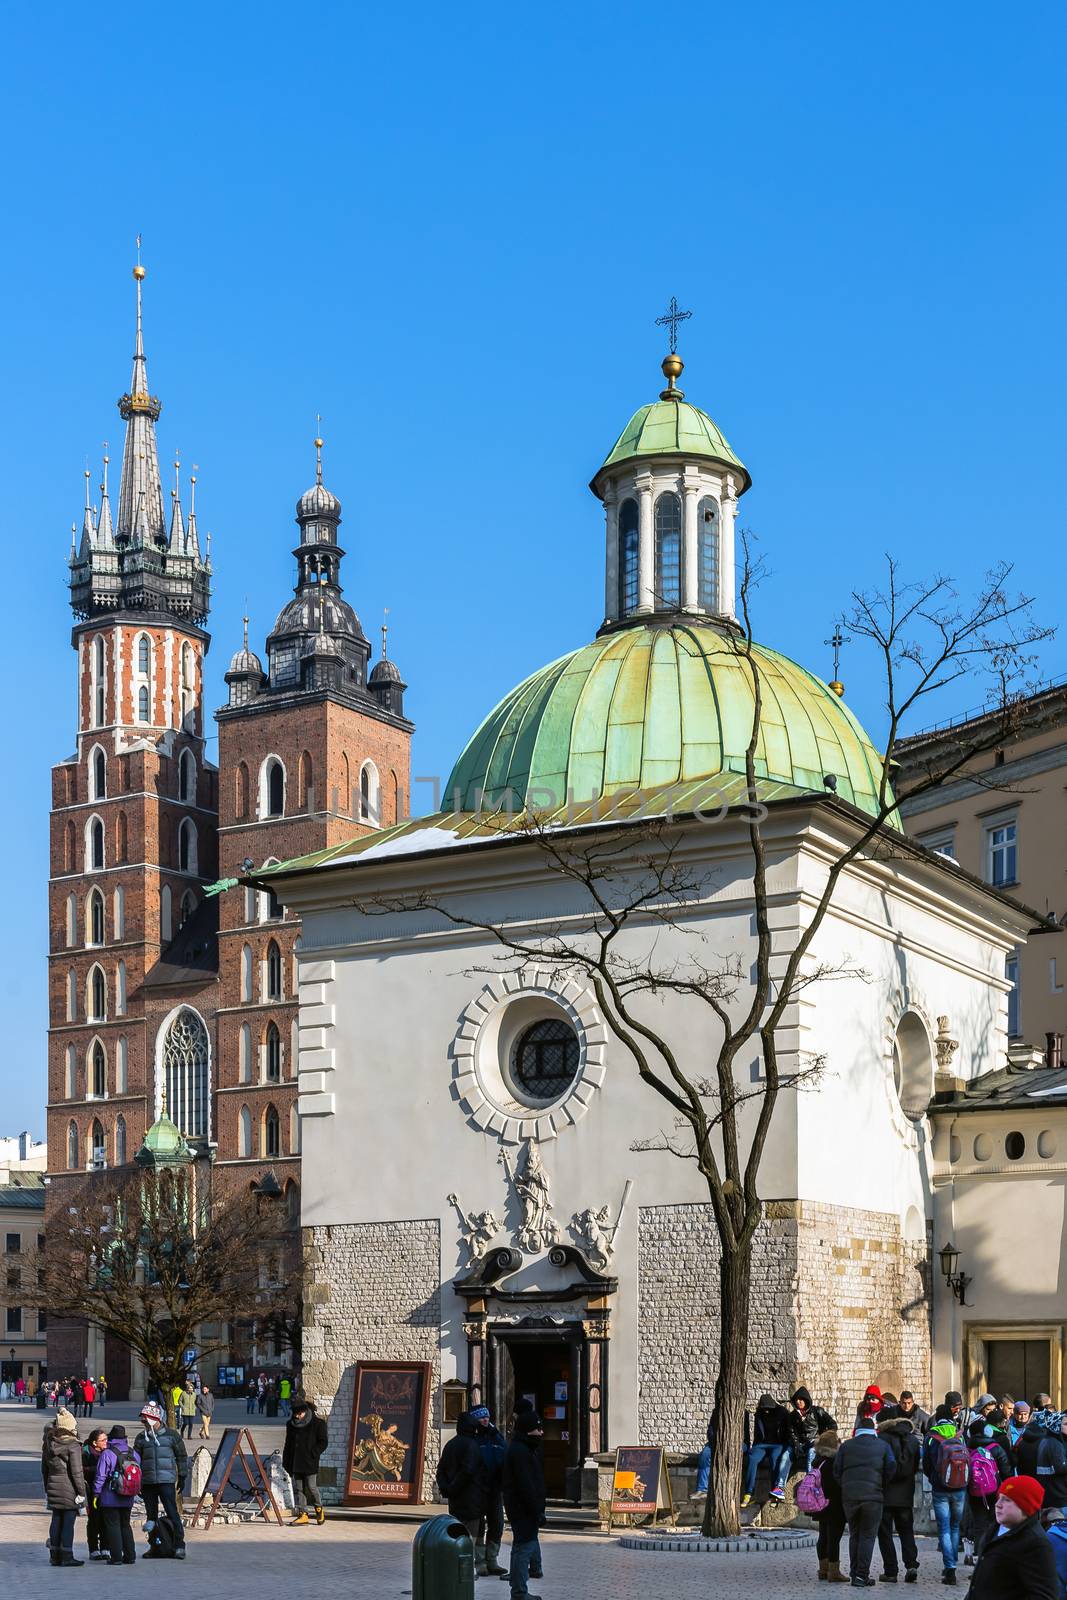 St. Adalbert (in the foreground) and St. Mary churches in the Main Square in Krakow, the most popular destination in Poland, full of many attractions for tourists.